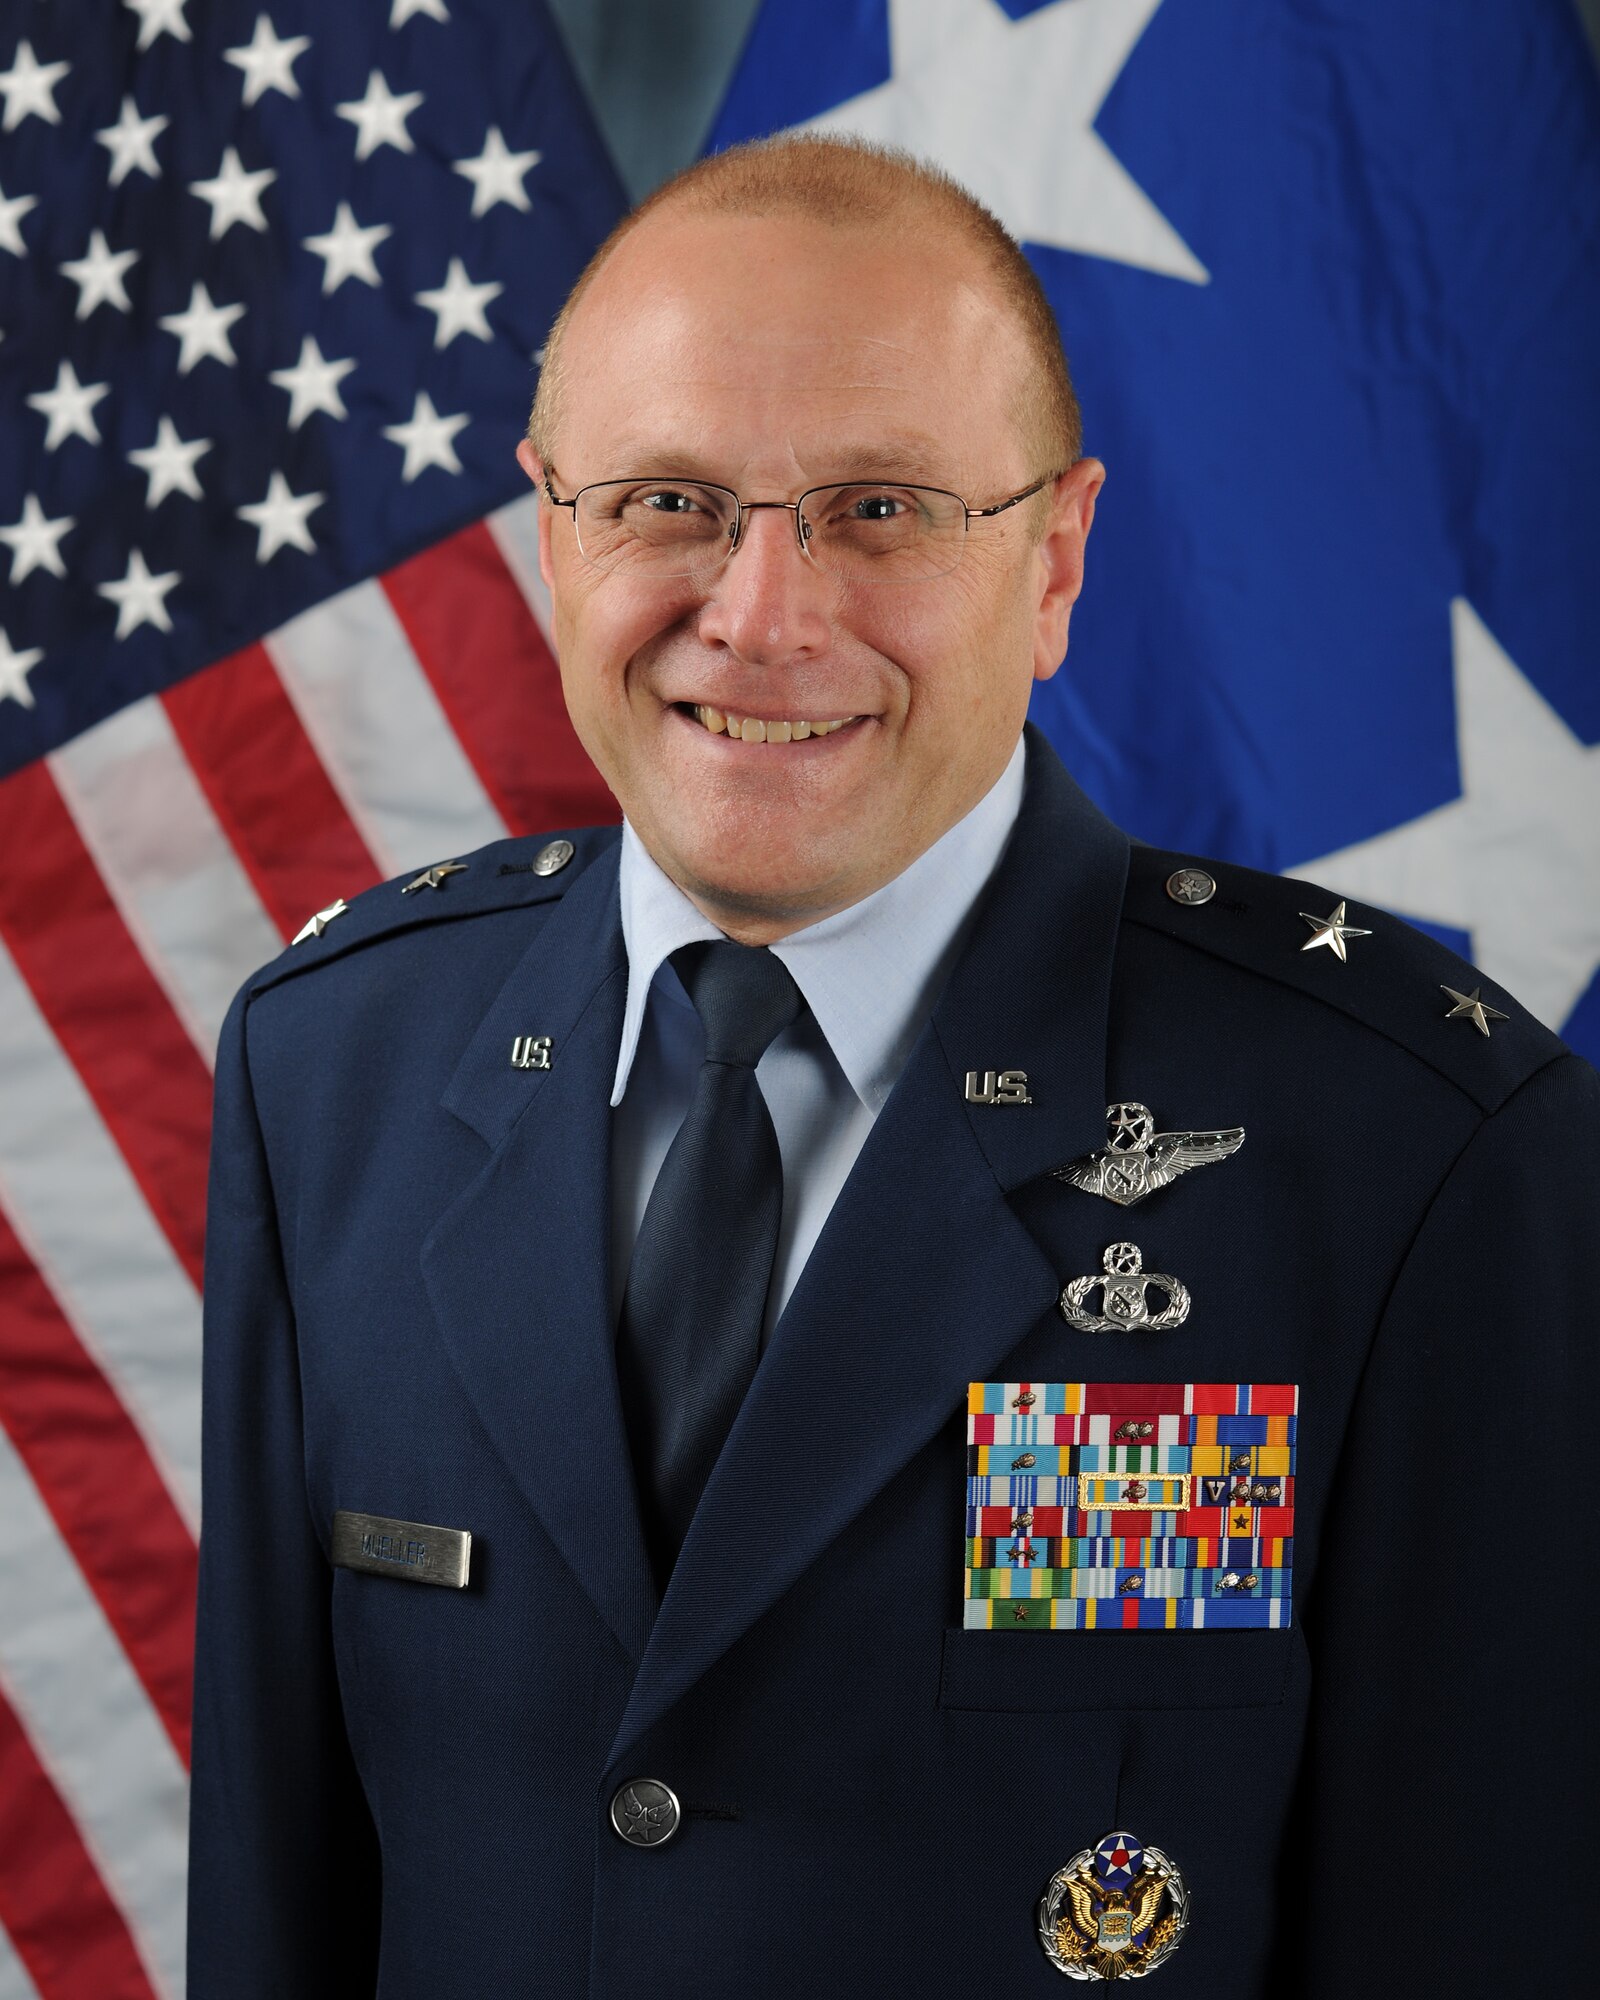 Maj. Gen. Andrew M. Mueller assumed the duties of Air Force chief of safety, Headquarters Air Force, in Washington, D.C., July 24. In that capacity, he also serves as the commander of the Air Force Safety Center at Kirtland Air Force Base, N.M. (U.S. Air Force photo)